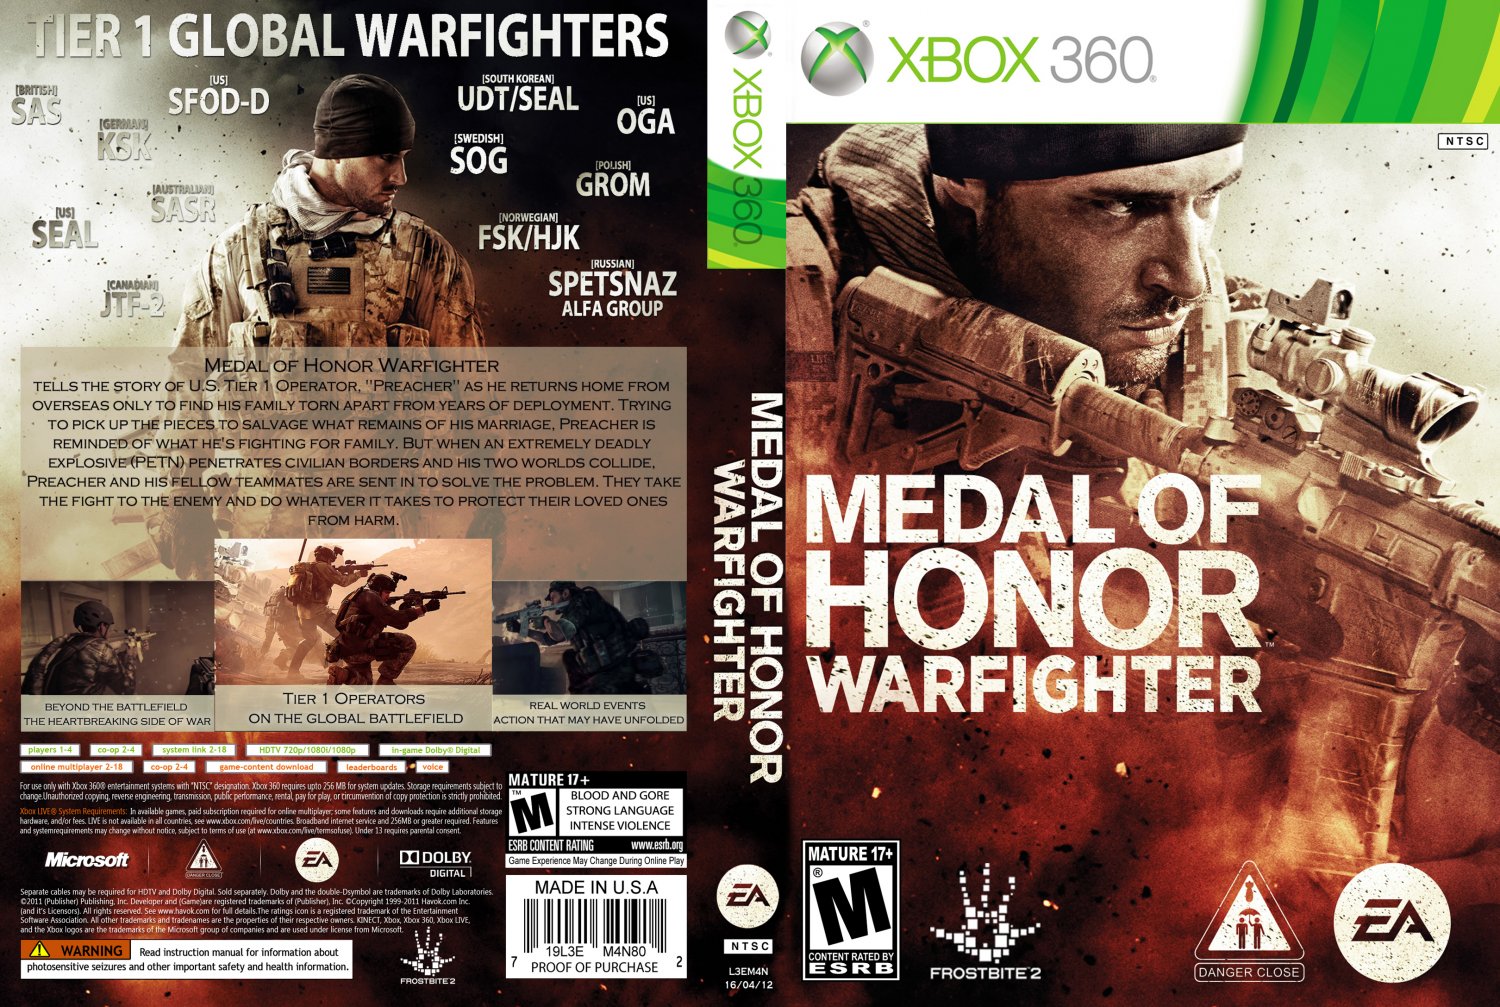 Medal of honor читы. Игра Medal of Honor. Medal of Honor Warfighter Xbox 360. Medal of Honor Warfighter Xbox 360 Disk. Xbox 360 обложка диска Medal of Honor Warfighter.